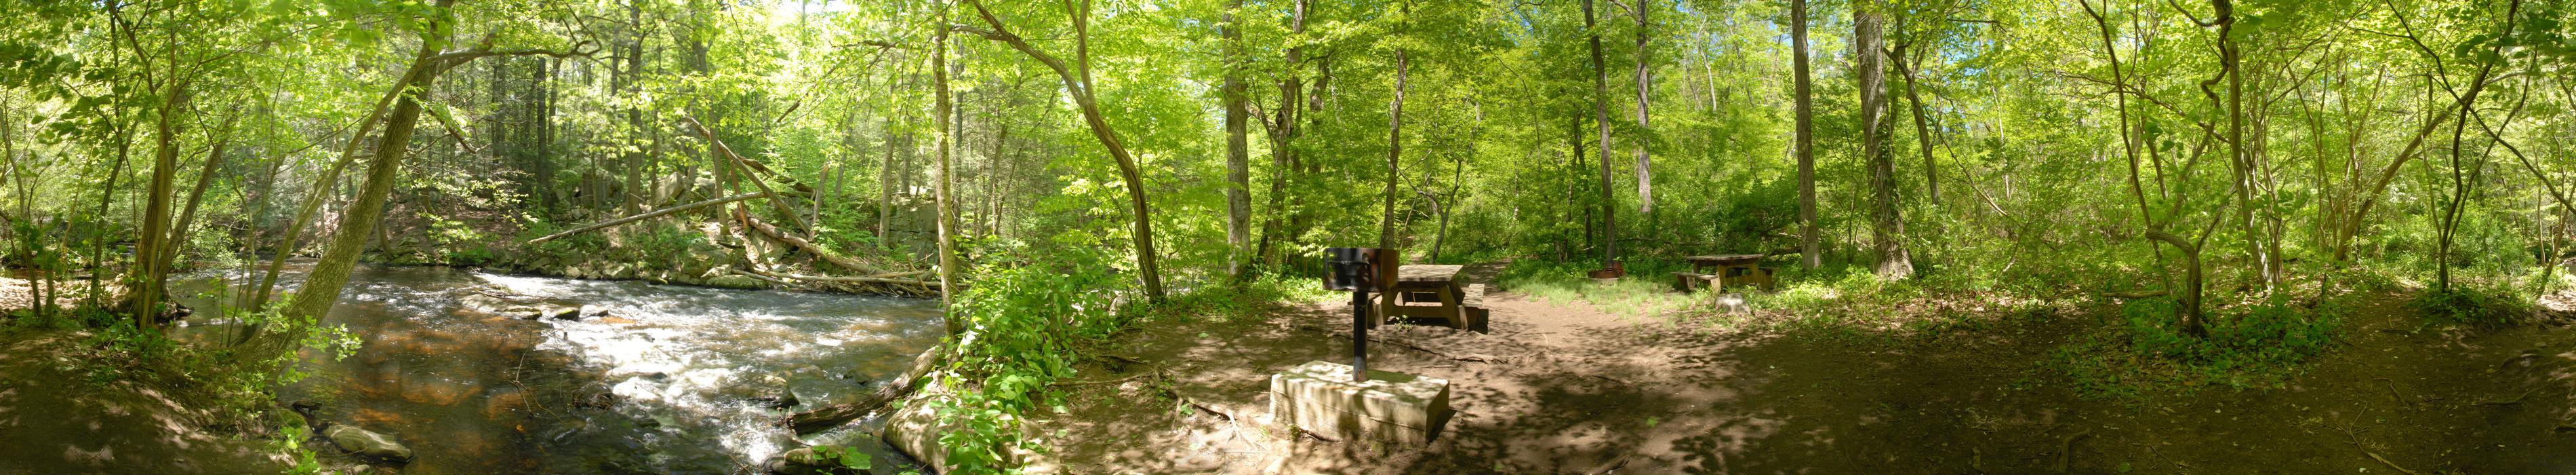 black river, moving water, panoramic, path, picnic table, river, rocks, trail, trees, water, woods